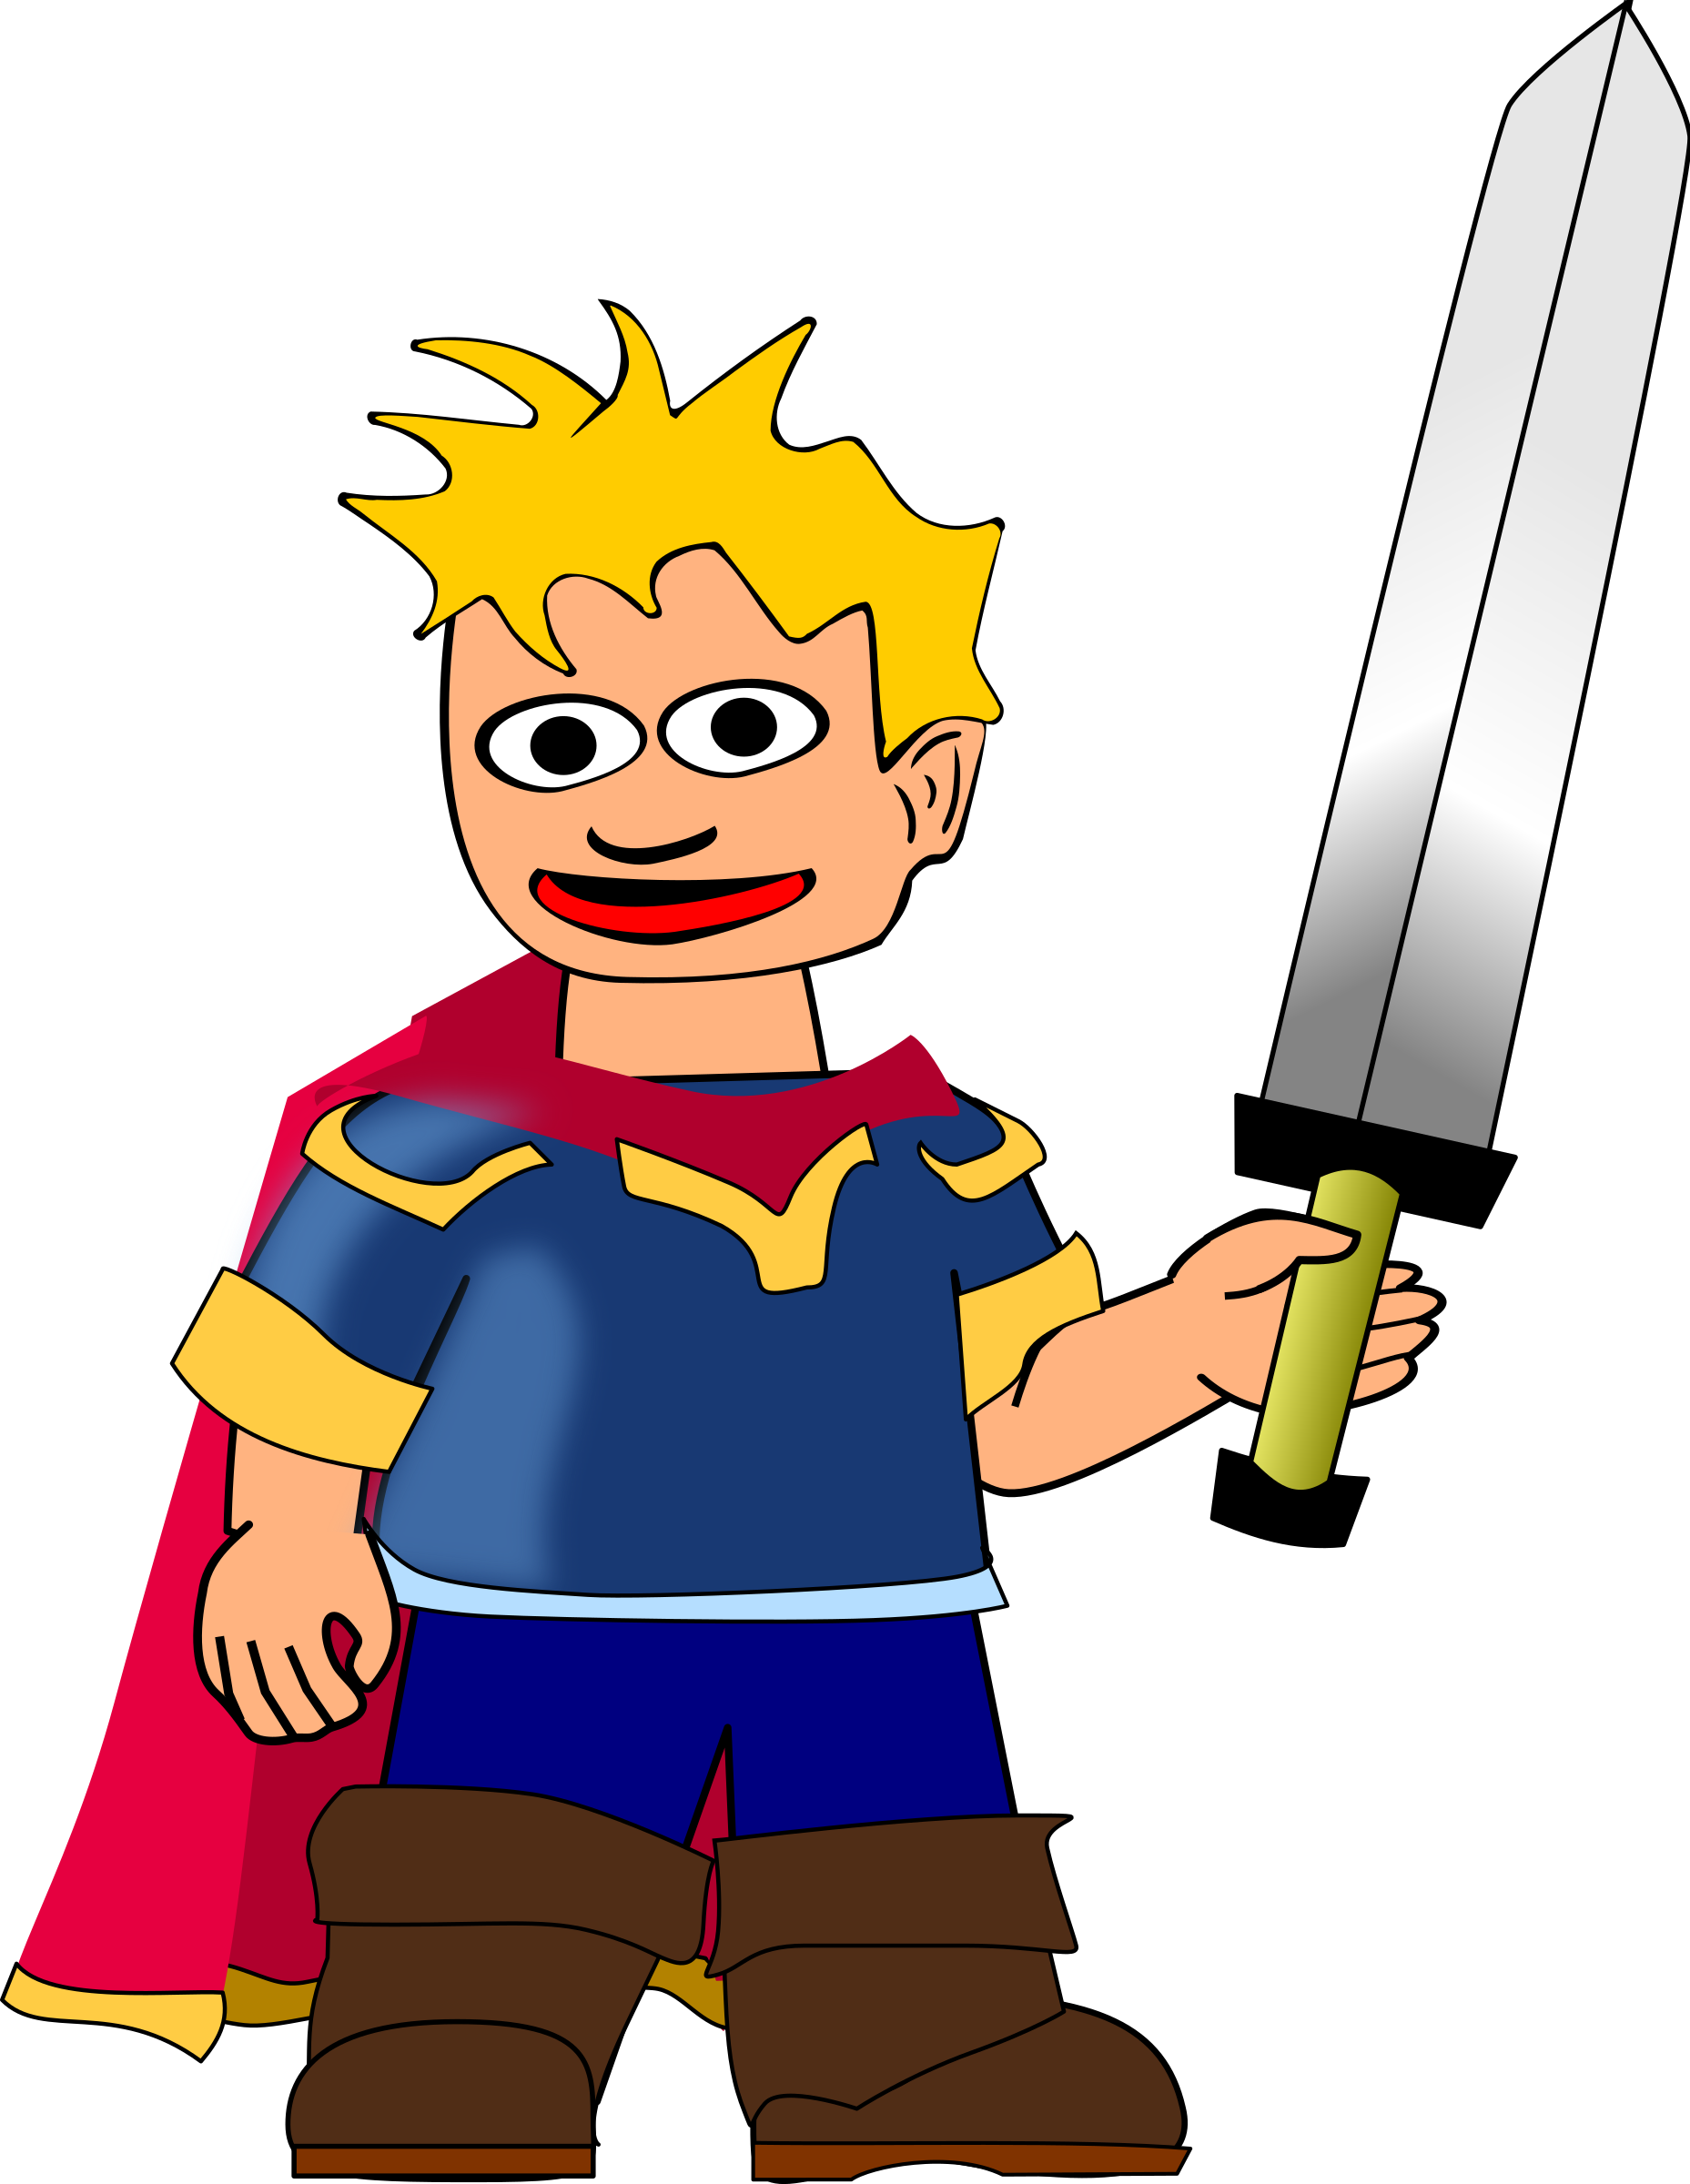 https://openclipart.org/image/2400px/svg_to_png/219527/Sword_man.png